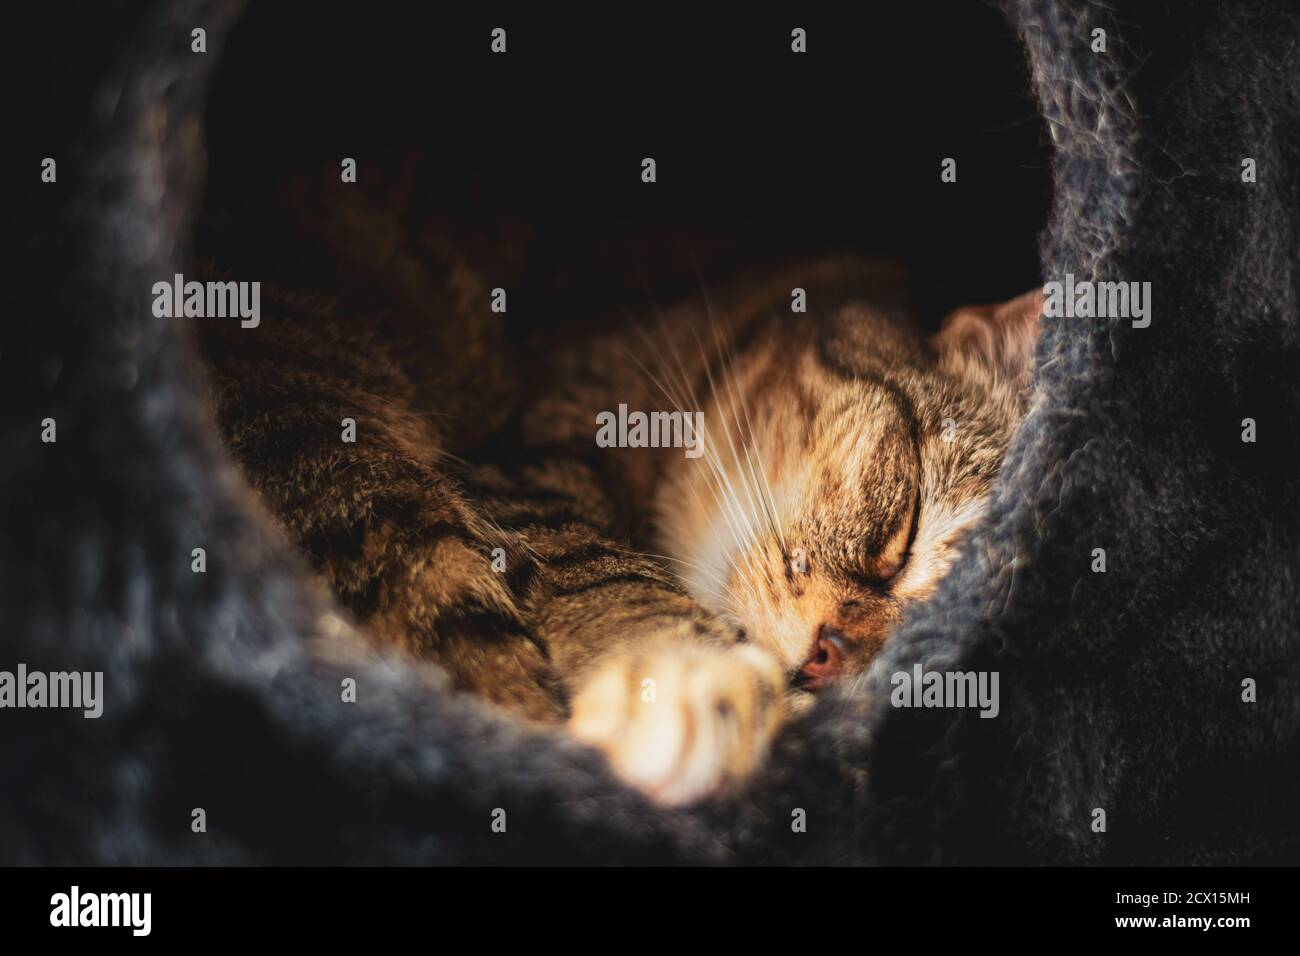 Cute cat sleeps in black soft sleeping basket with a hole in it Stock Photo